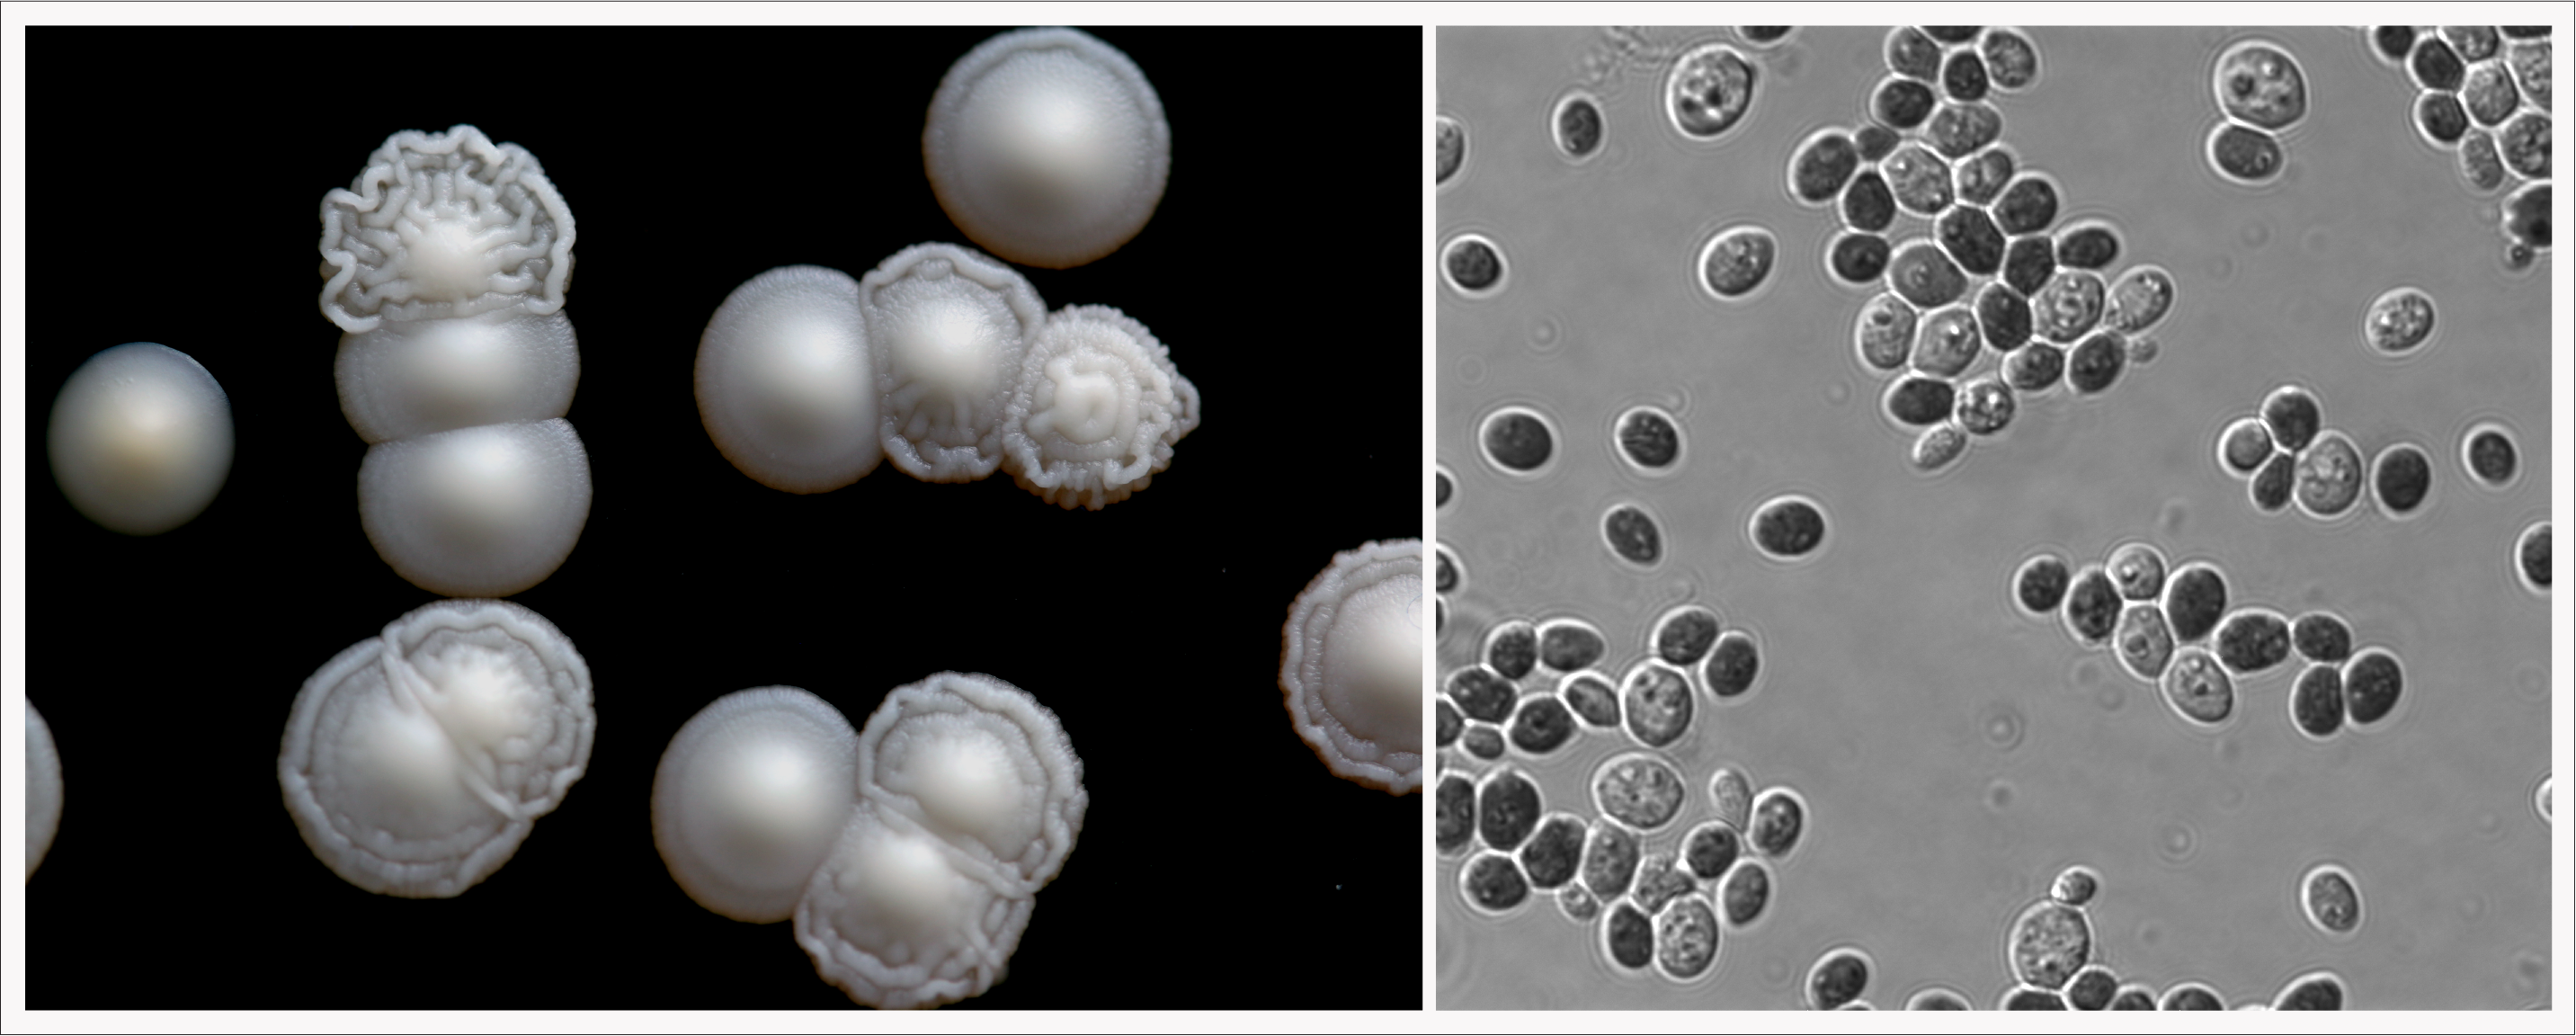 Left: K. humilis is the smallish, pale orange/white colony at the very left (the other colonies are Saccharomyces cerevisiae).  Right: K. humilis cells at magnification. 